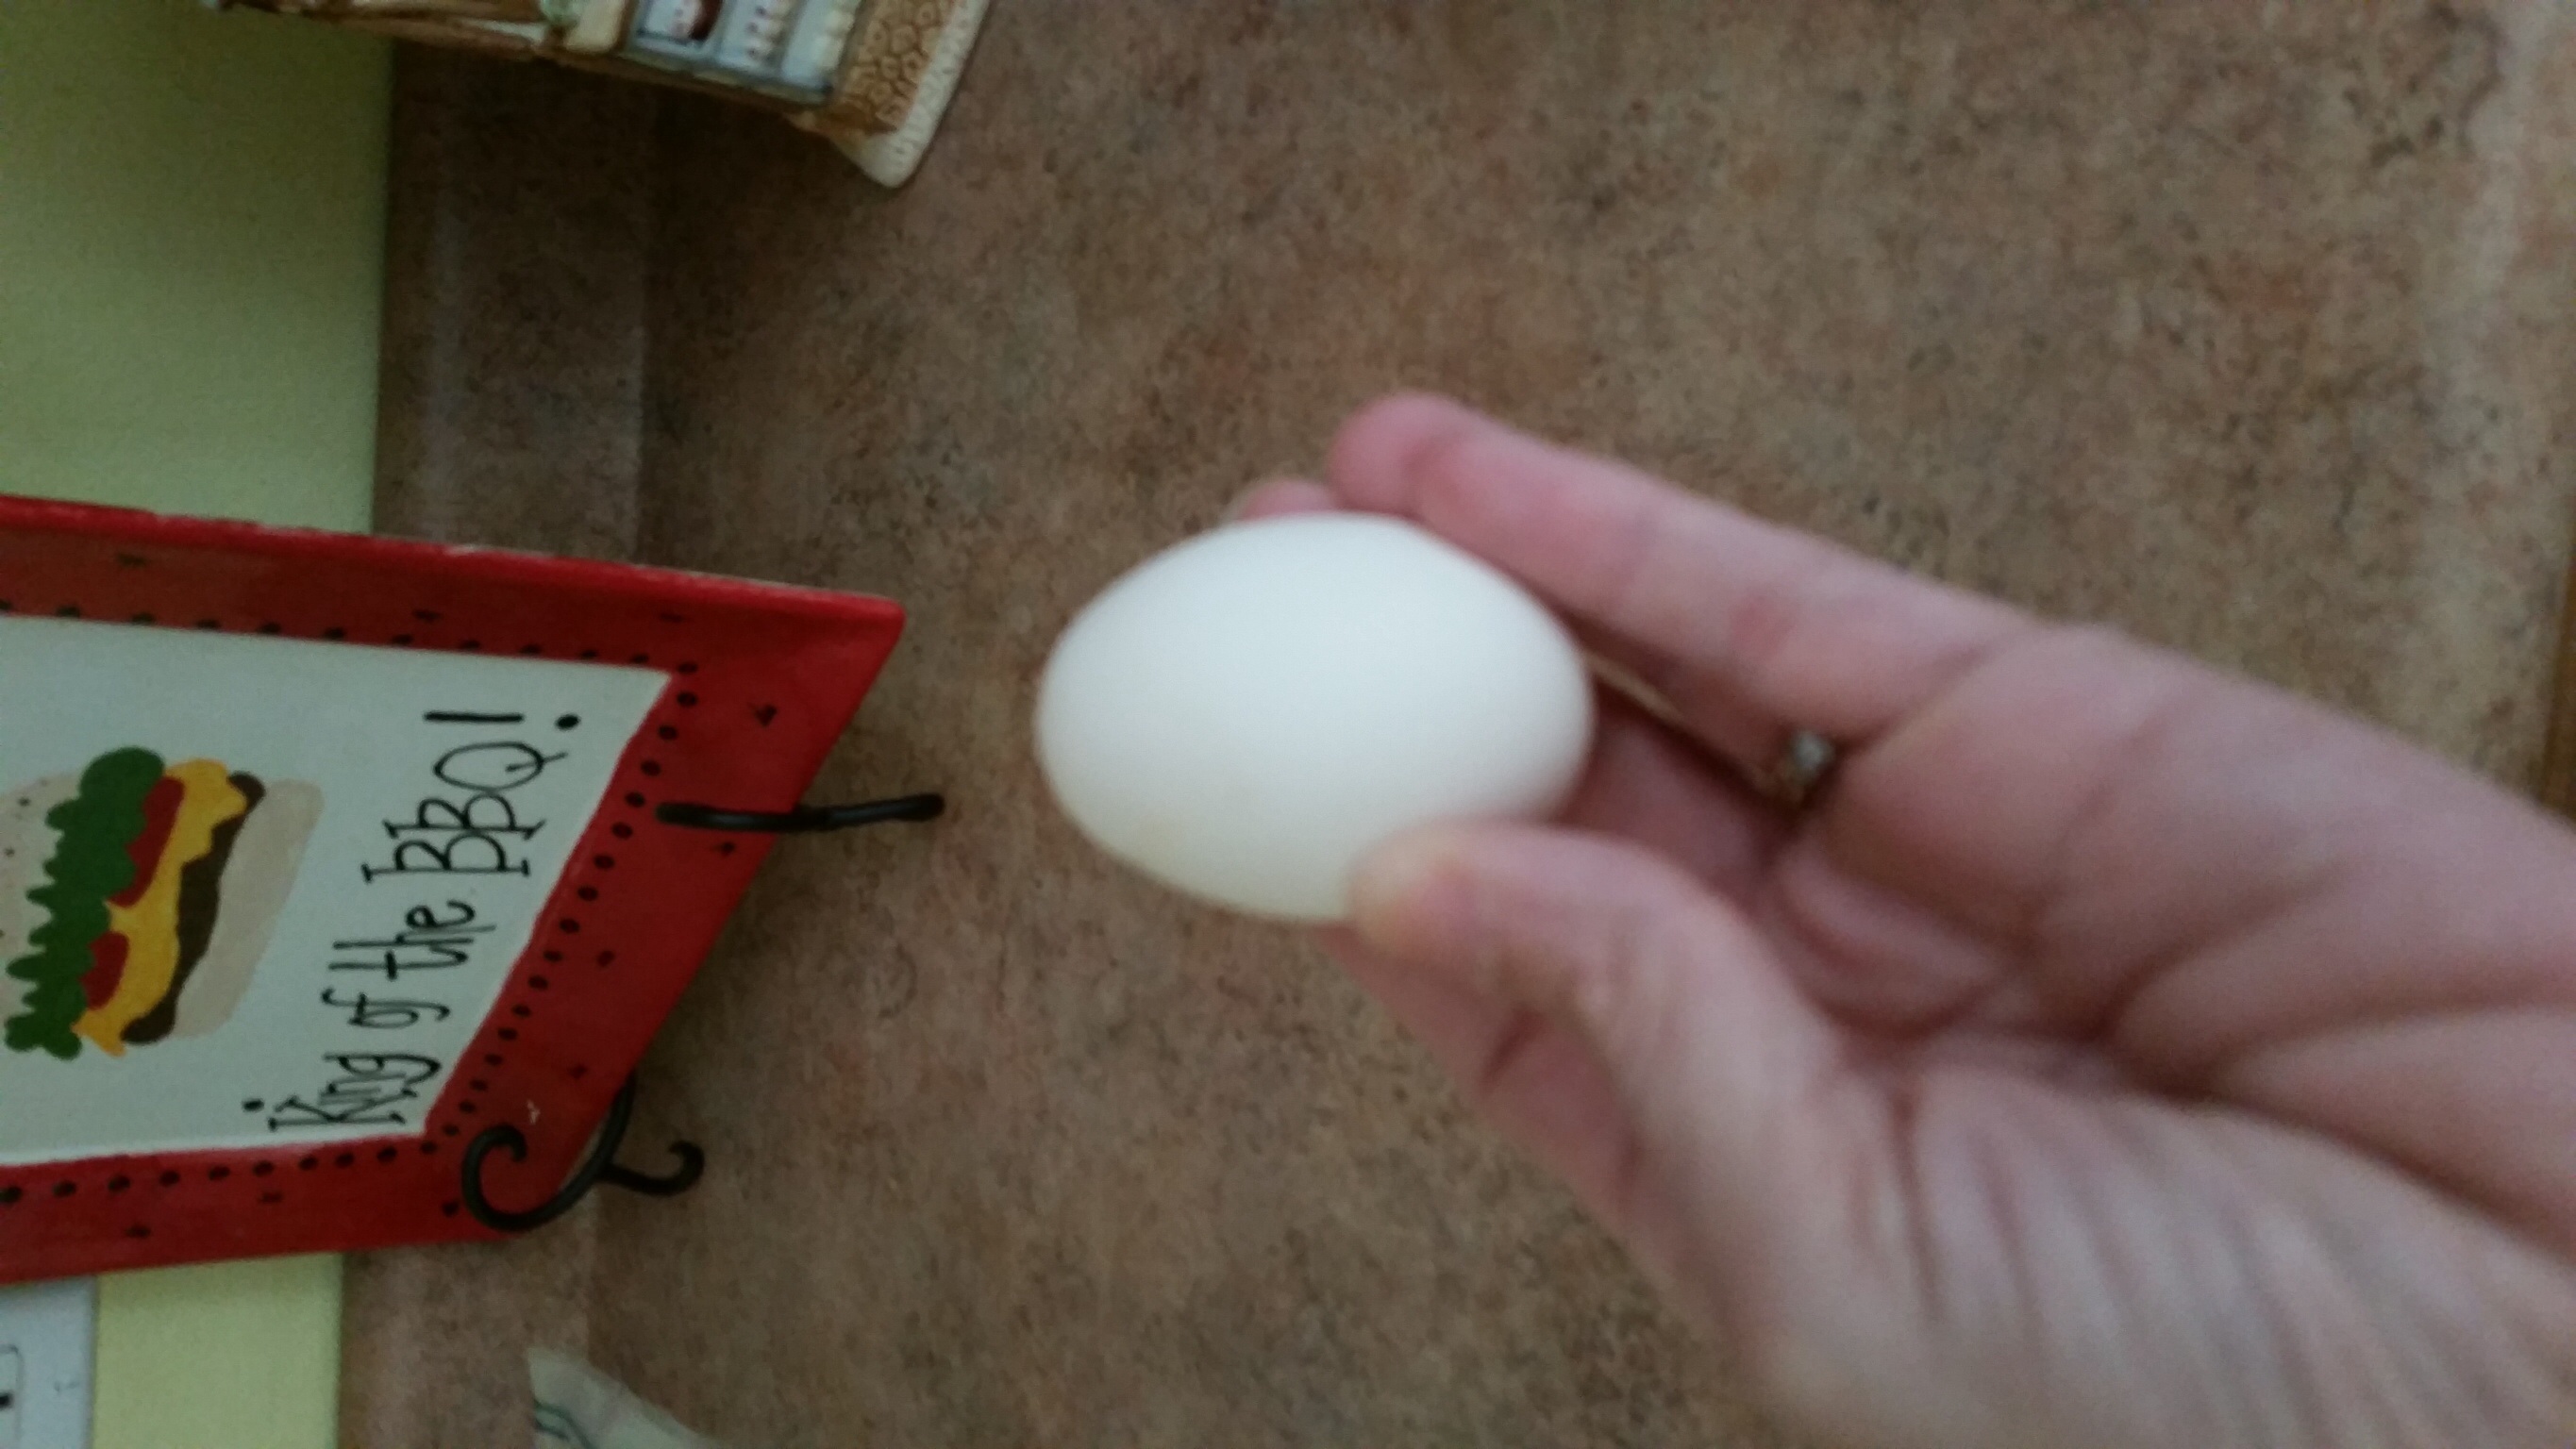 My first egg!!!!